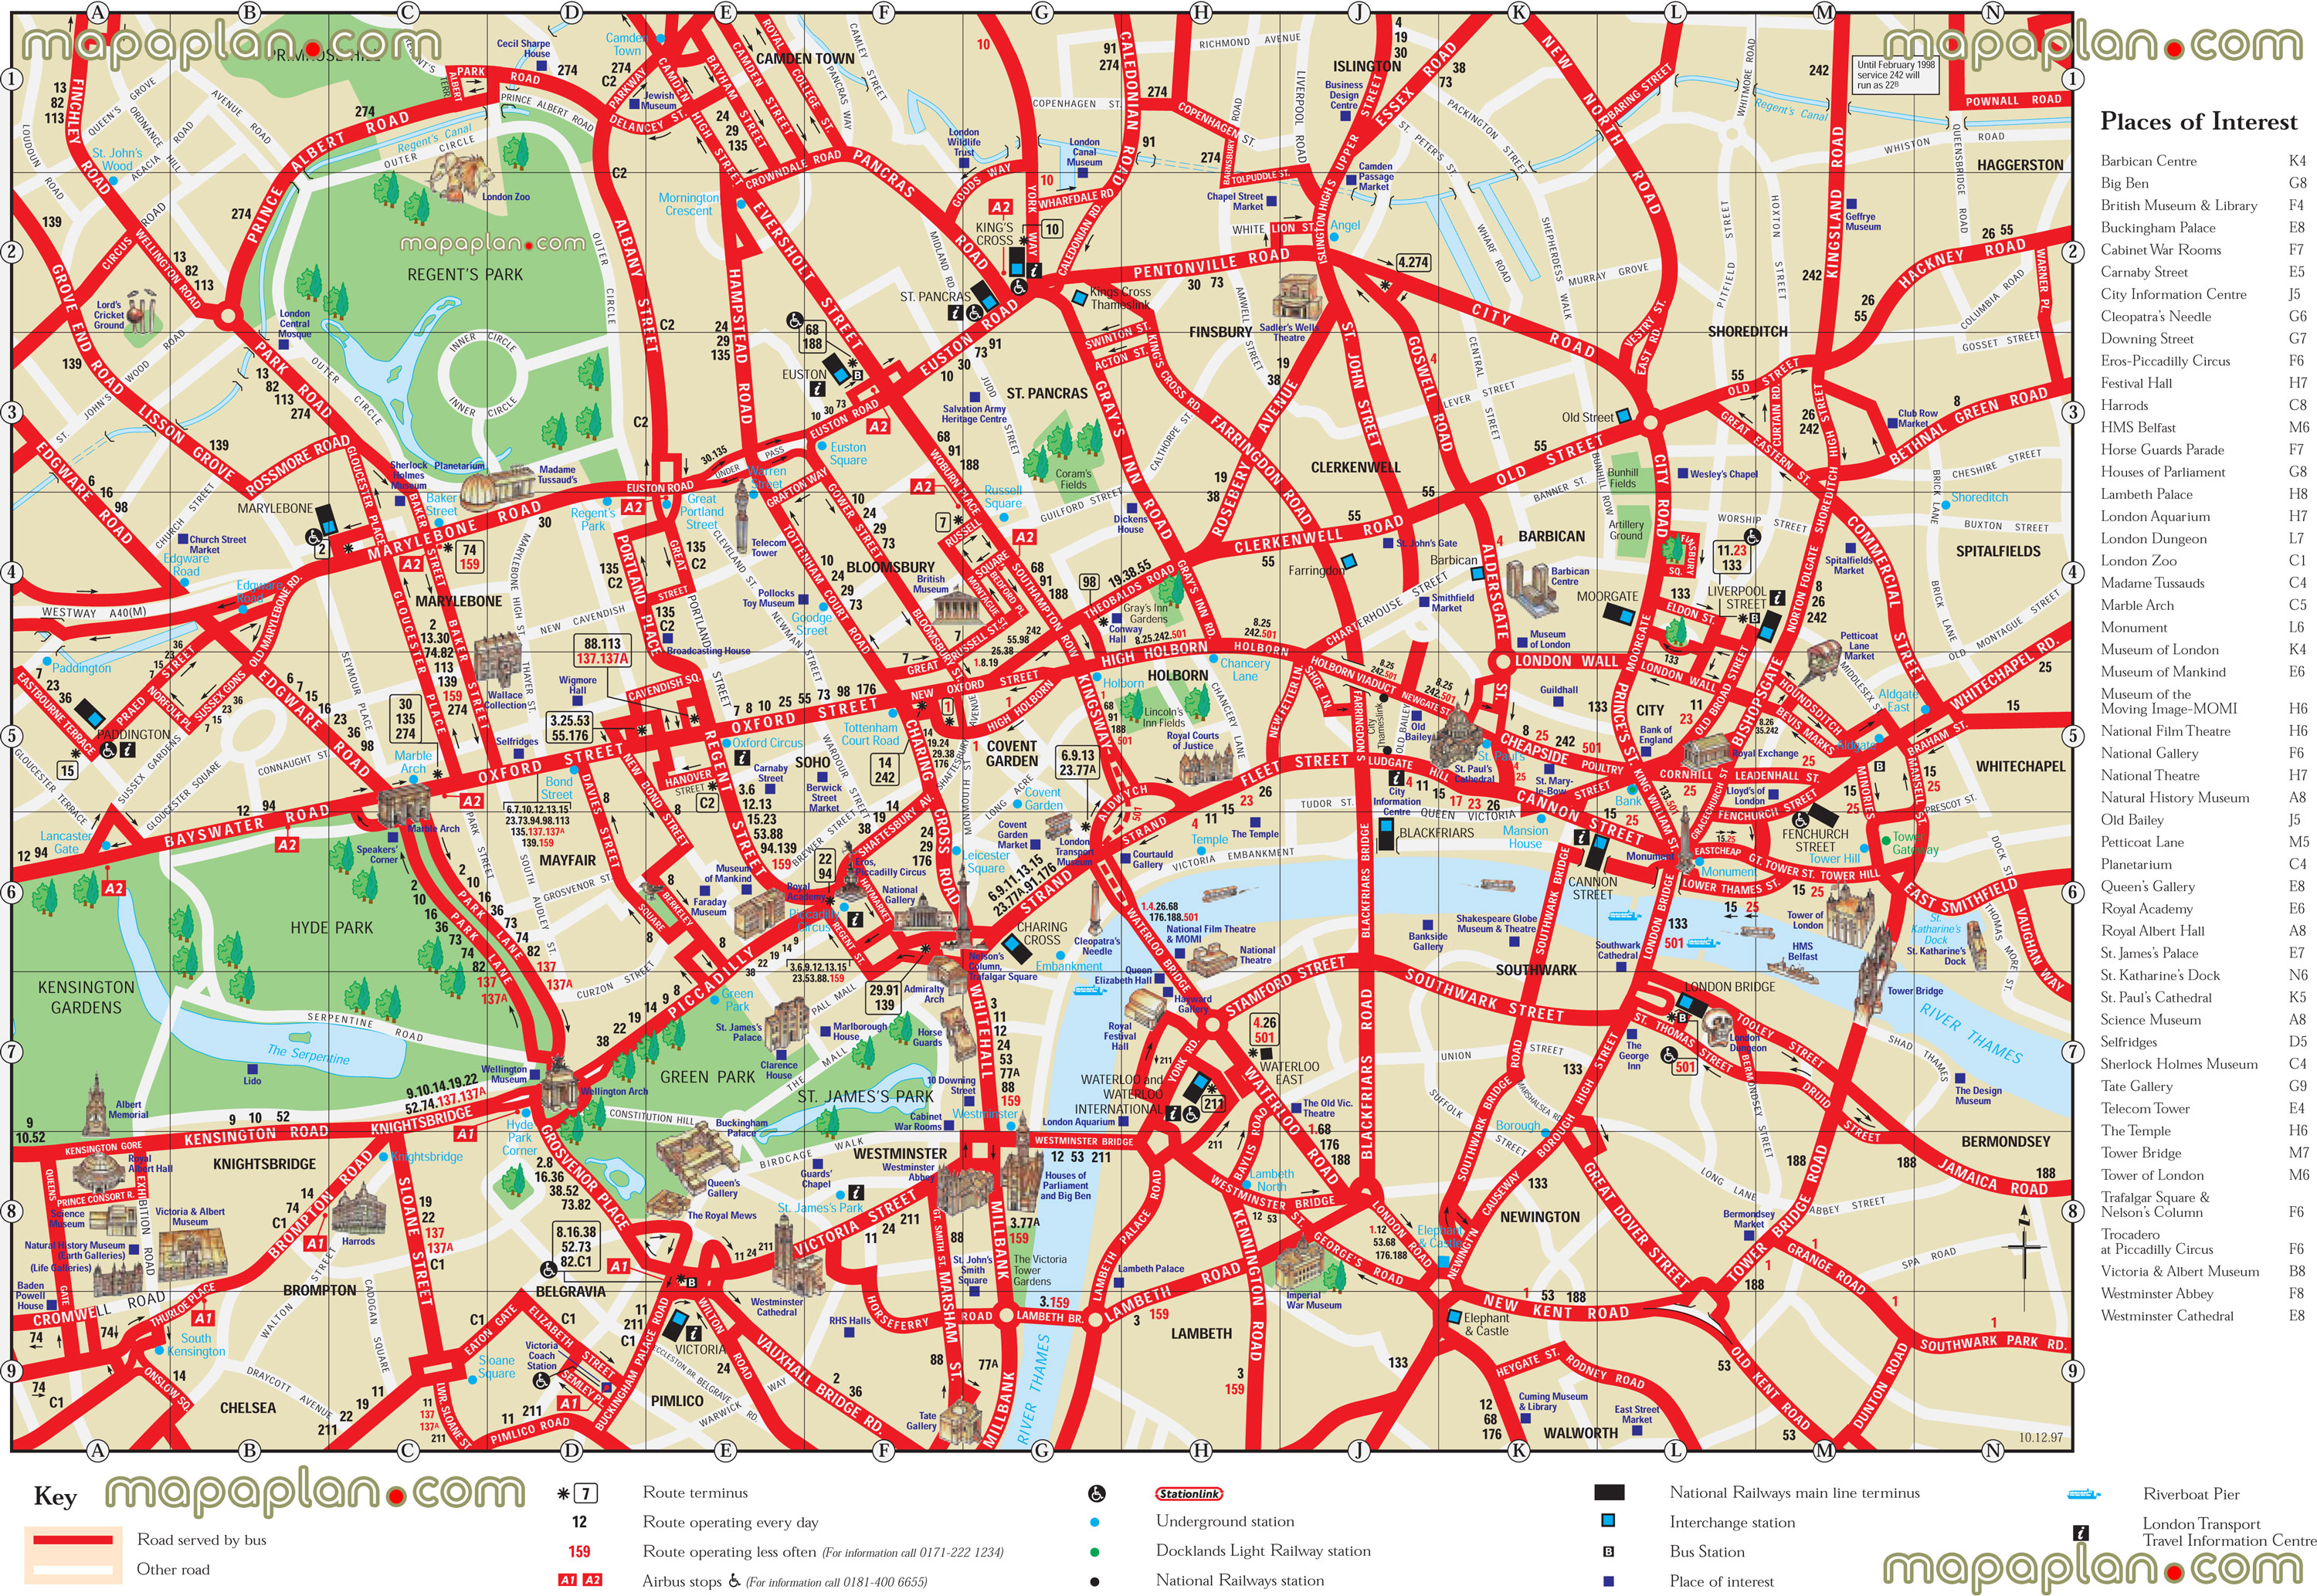 interactive printable detailed travel visitors guide inner London places interest along street names bus numbers must see destinationss London Top tourist attractions map